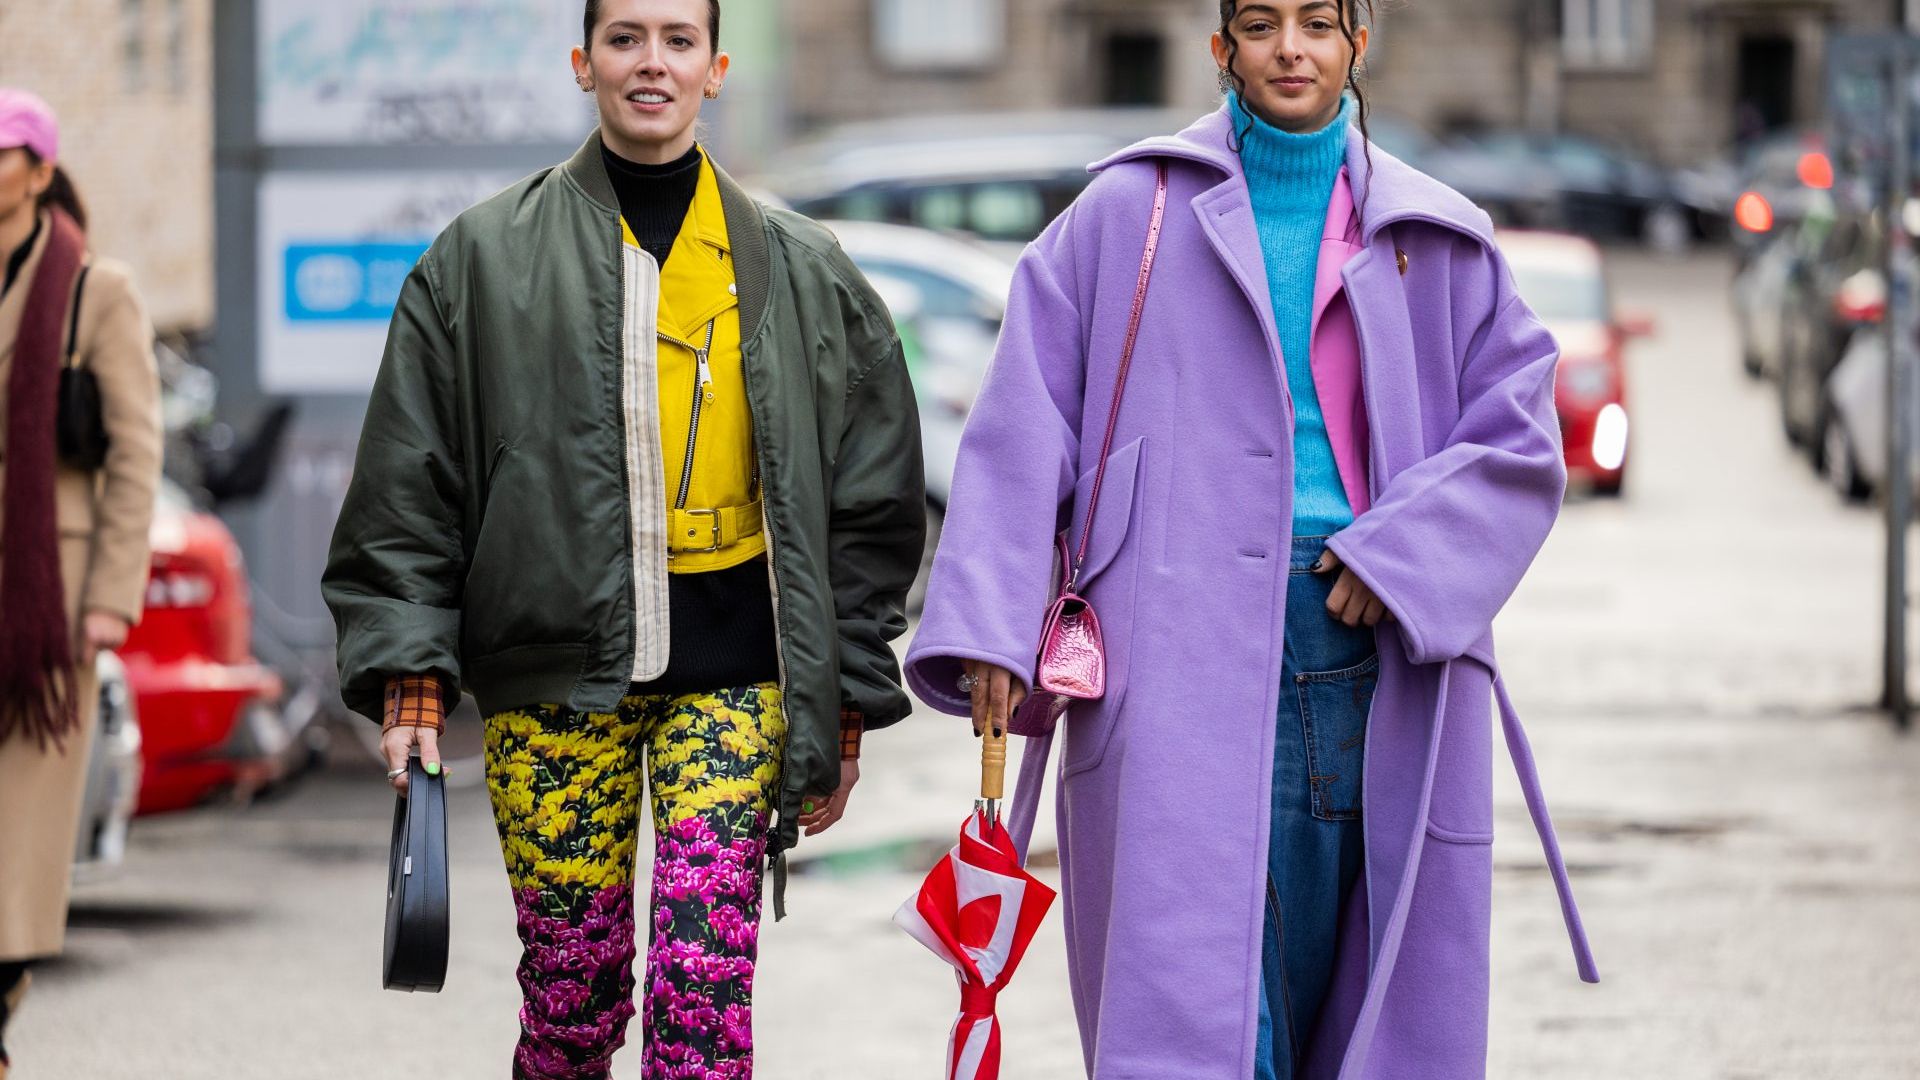 Copenhagen Fashion Week: how to dress for the cold